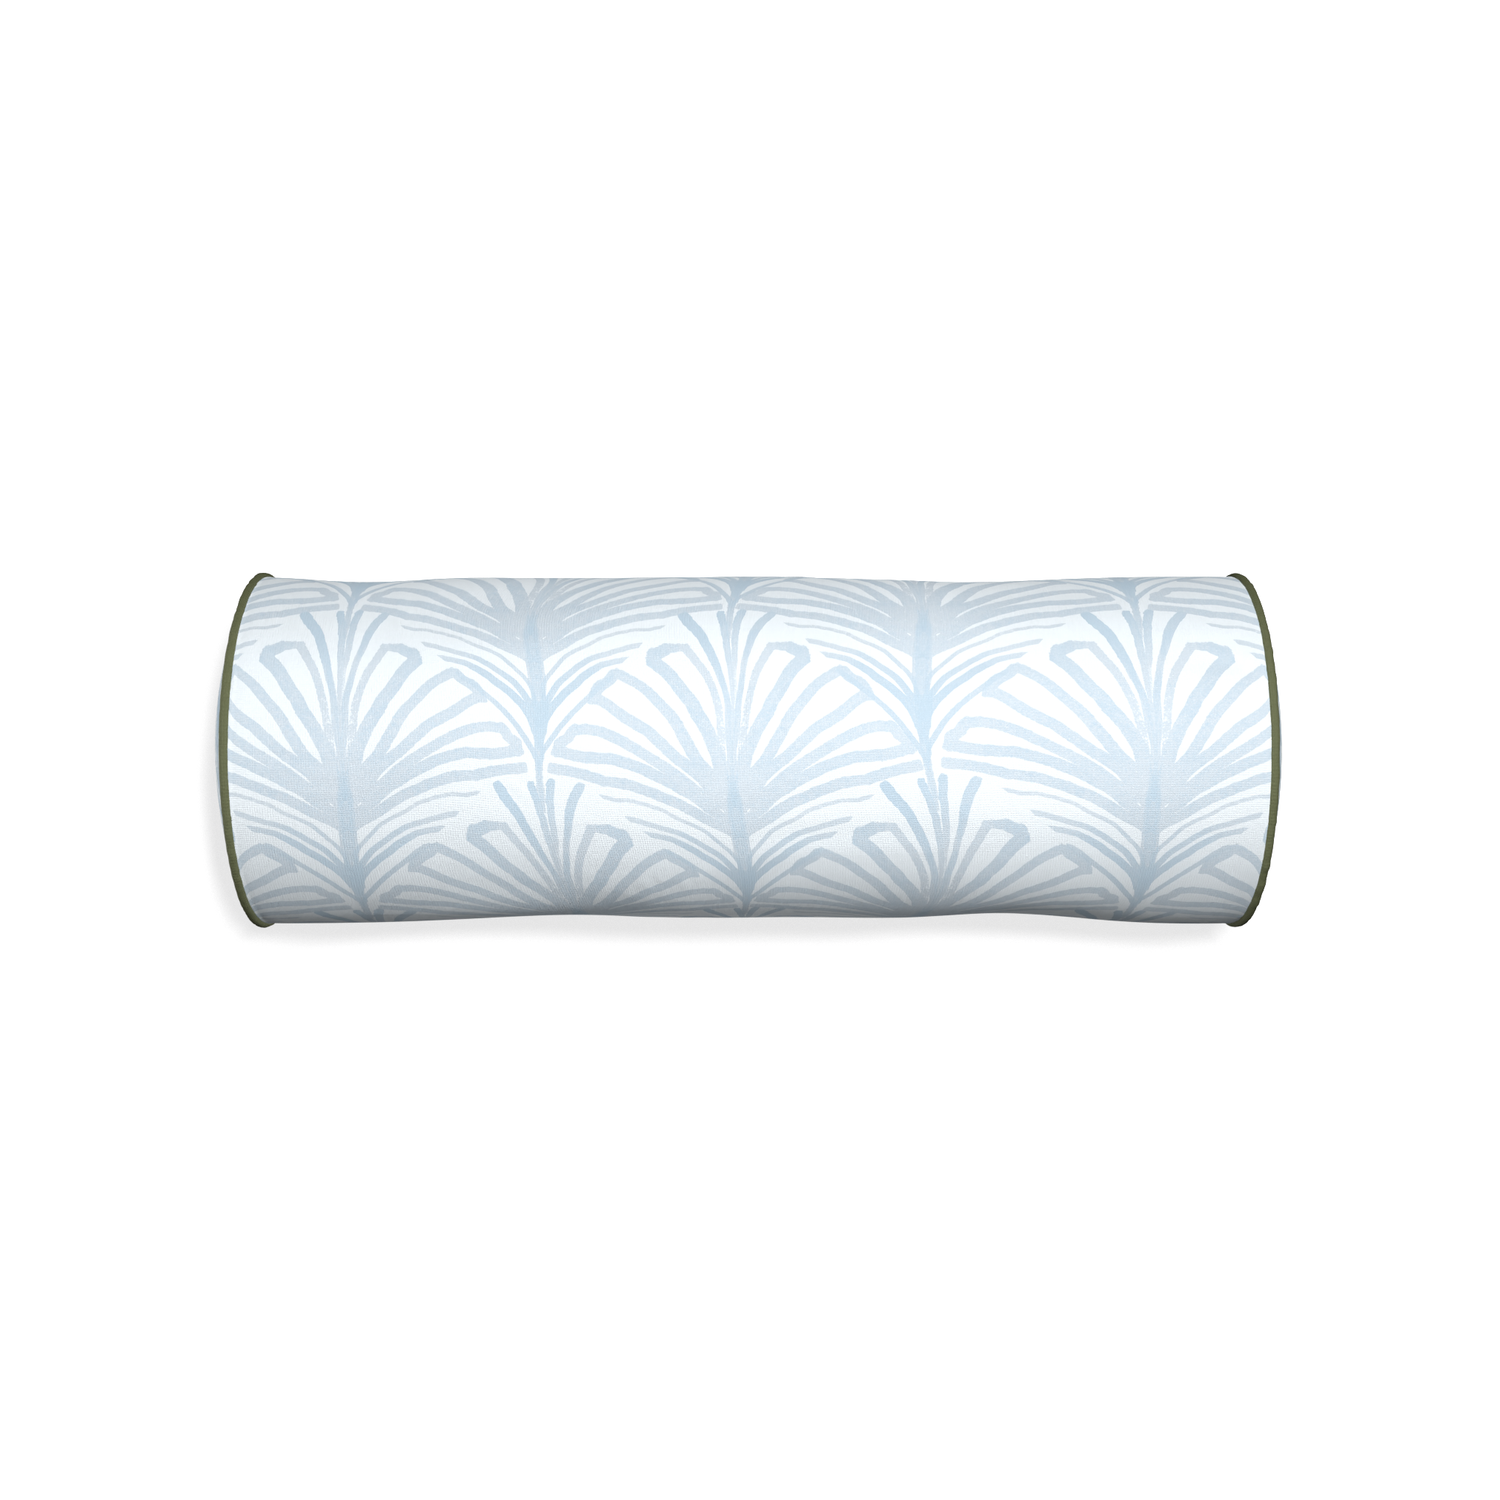 Bolster suzy sky custom pillow with f piping on white background